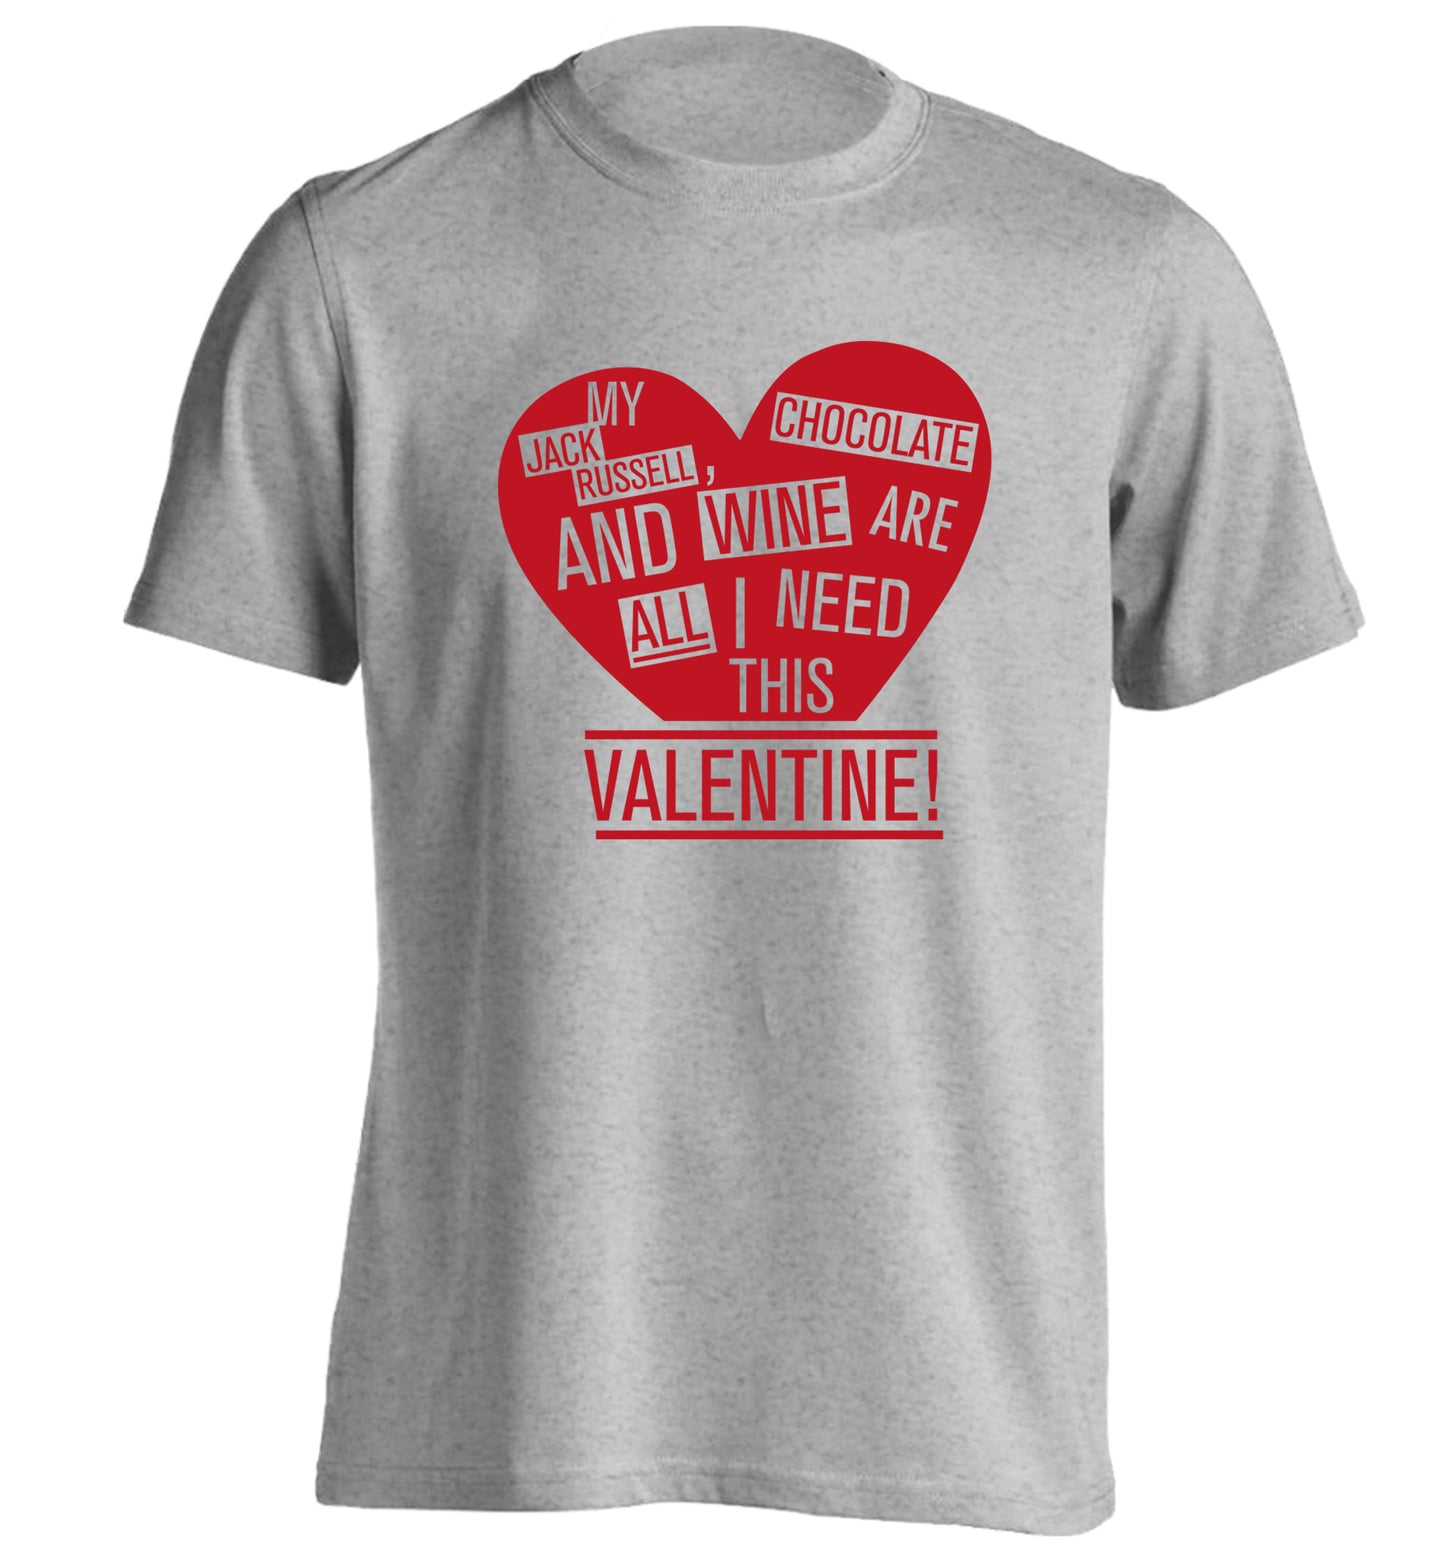 My jack russell, chocolate and wine are all I need this valentine! adults unisex grey Tshirt 2XL